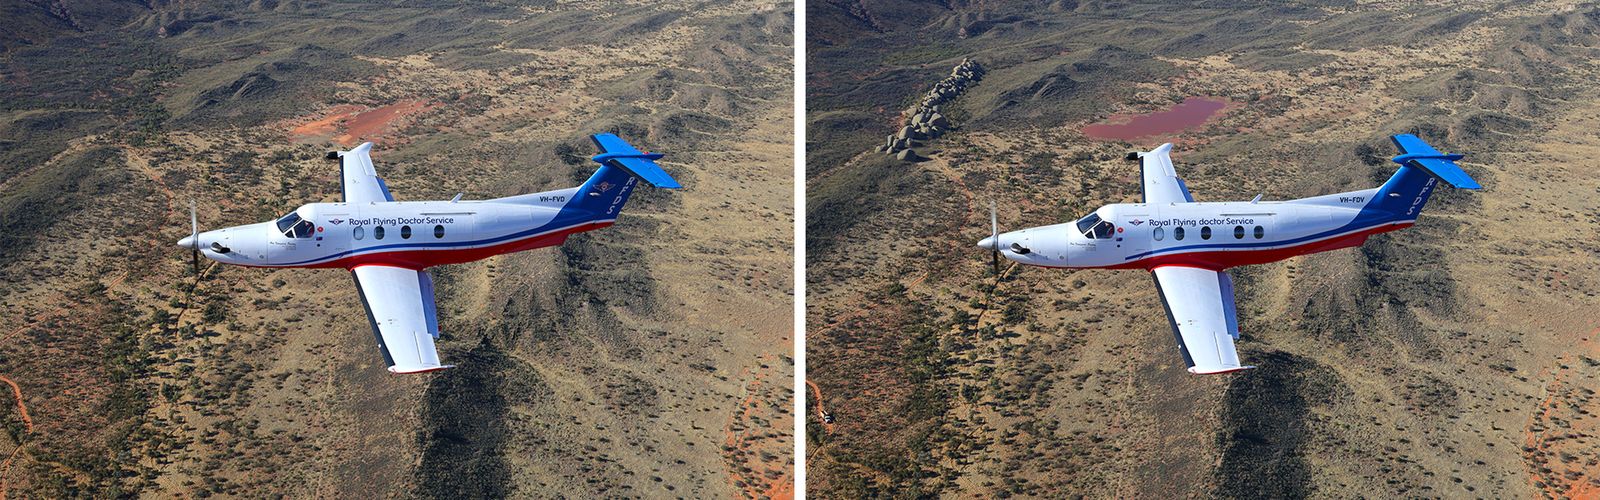 RFDS PC-12 Spot the difference